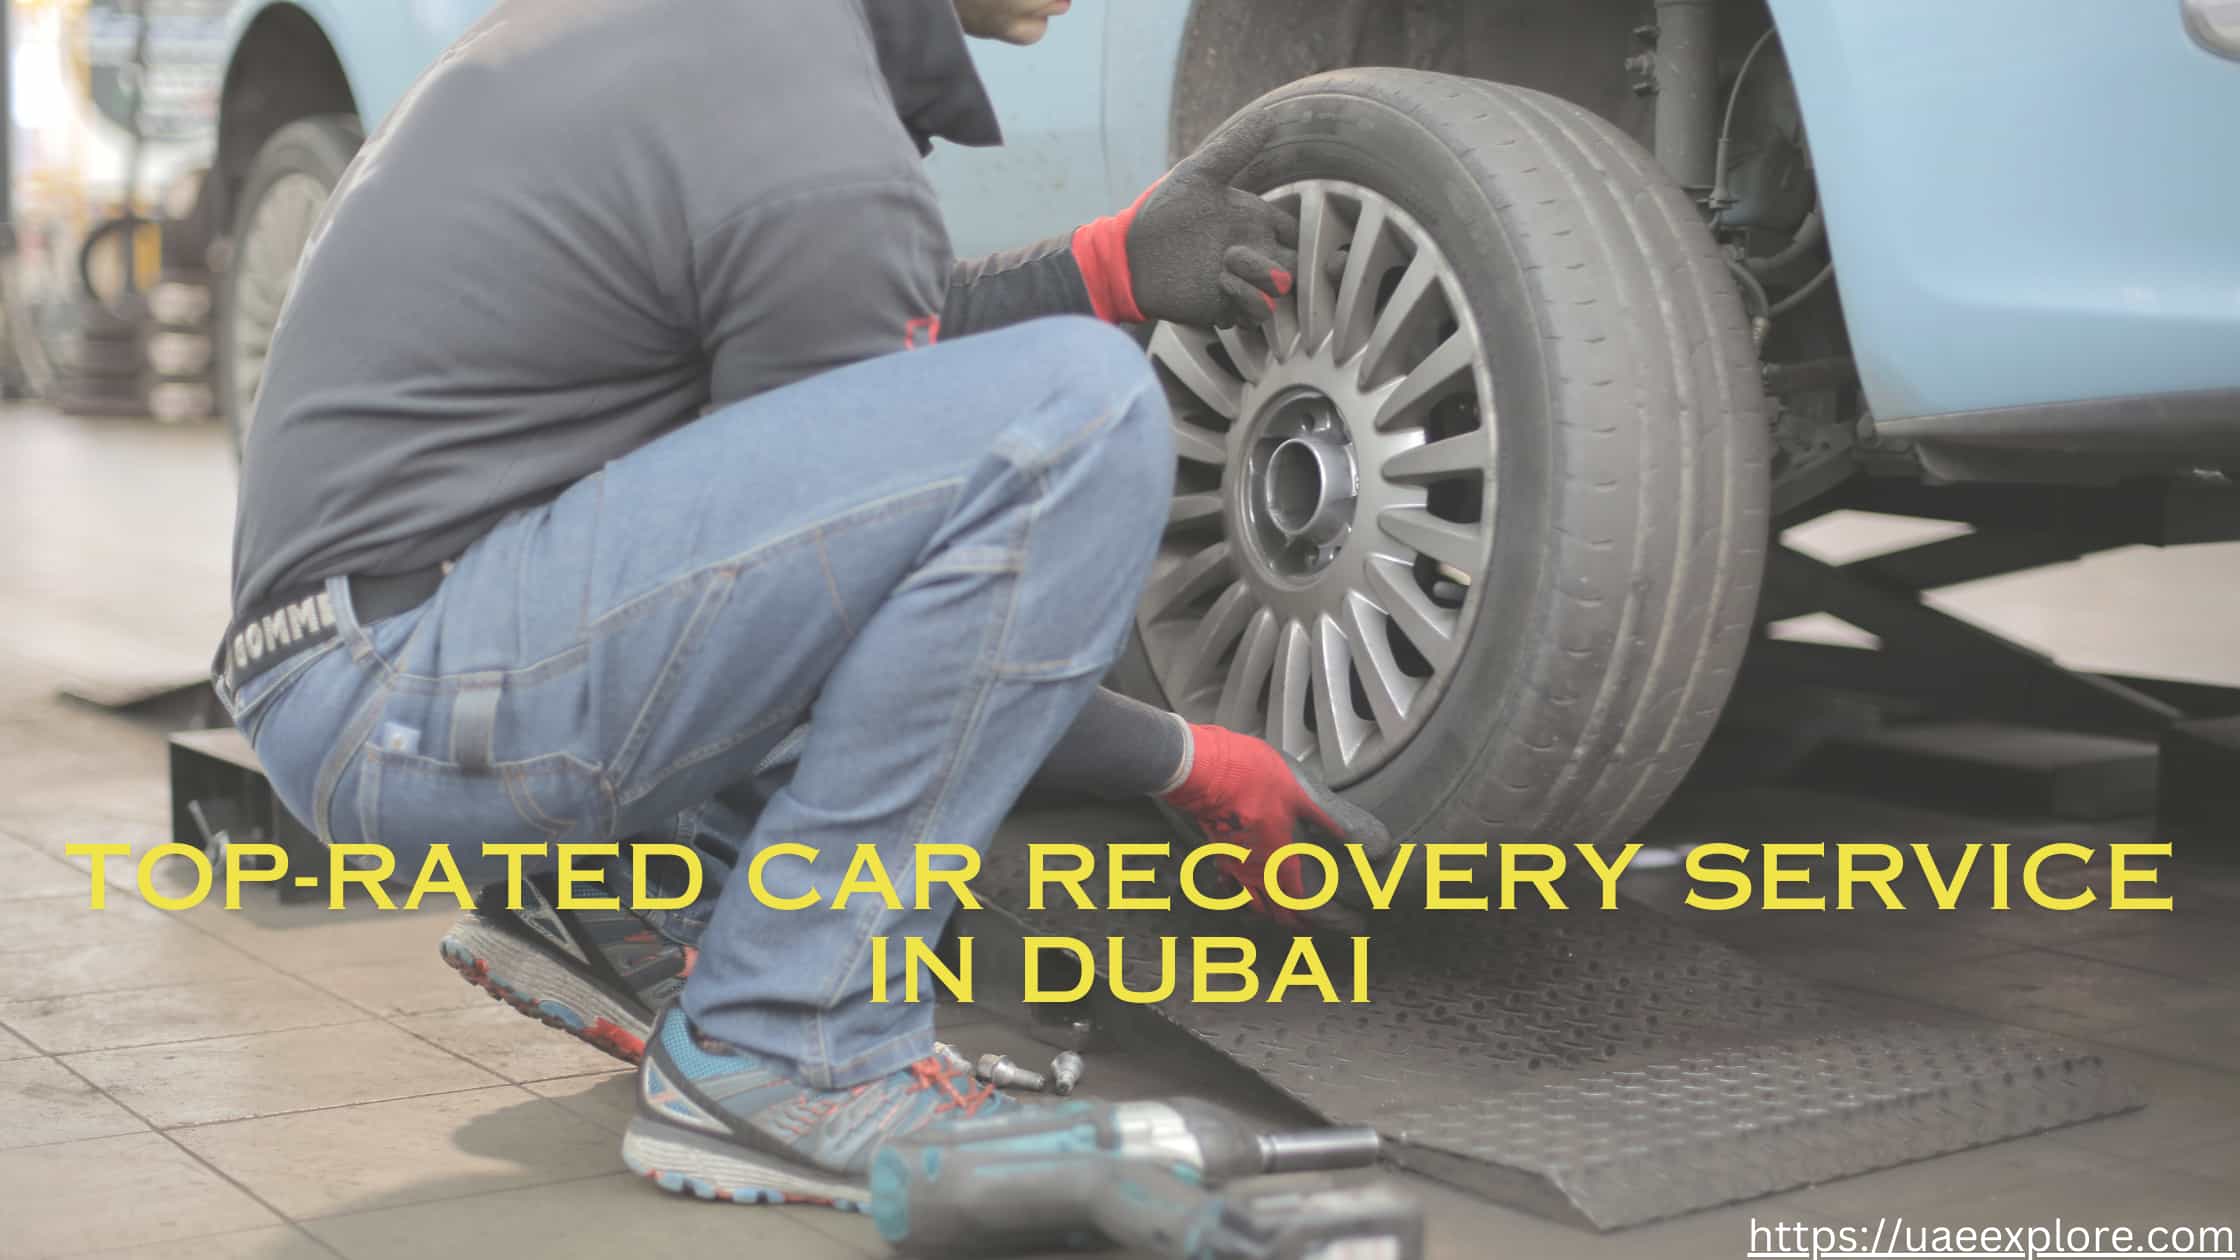 Top-Rated Car Recovery Service in Dubai